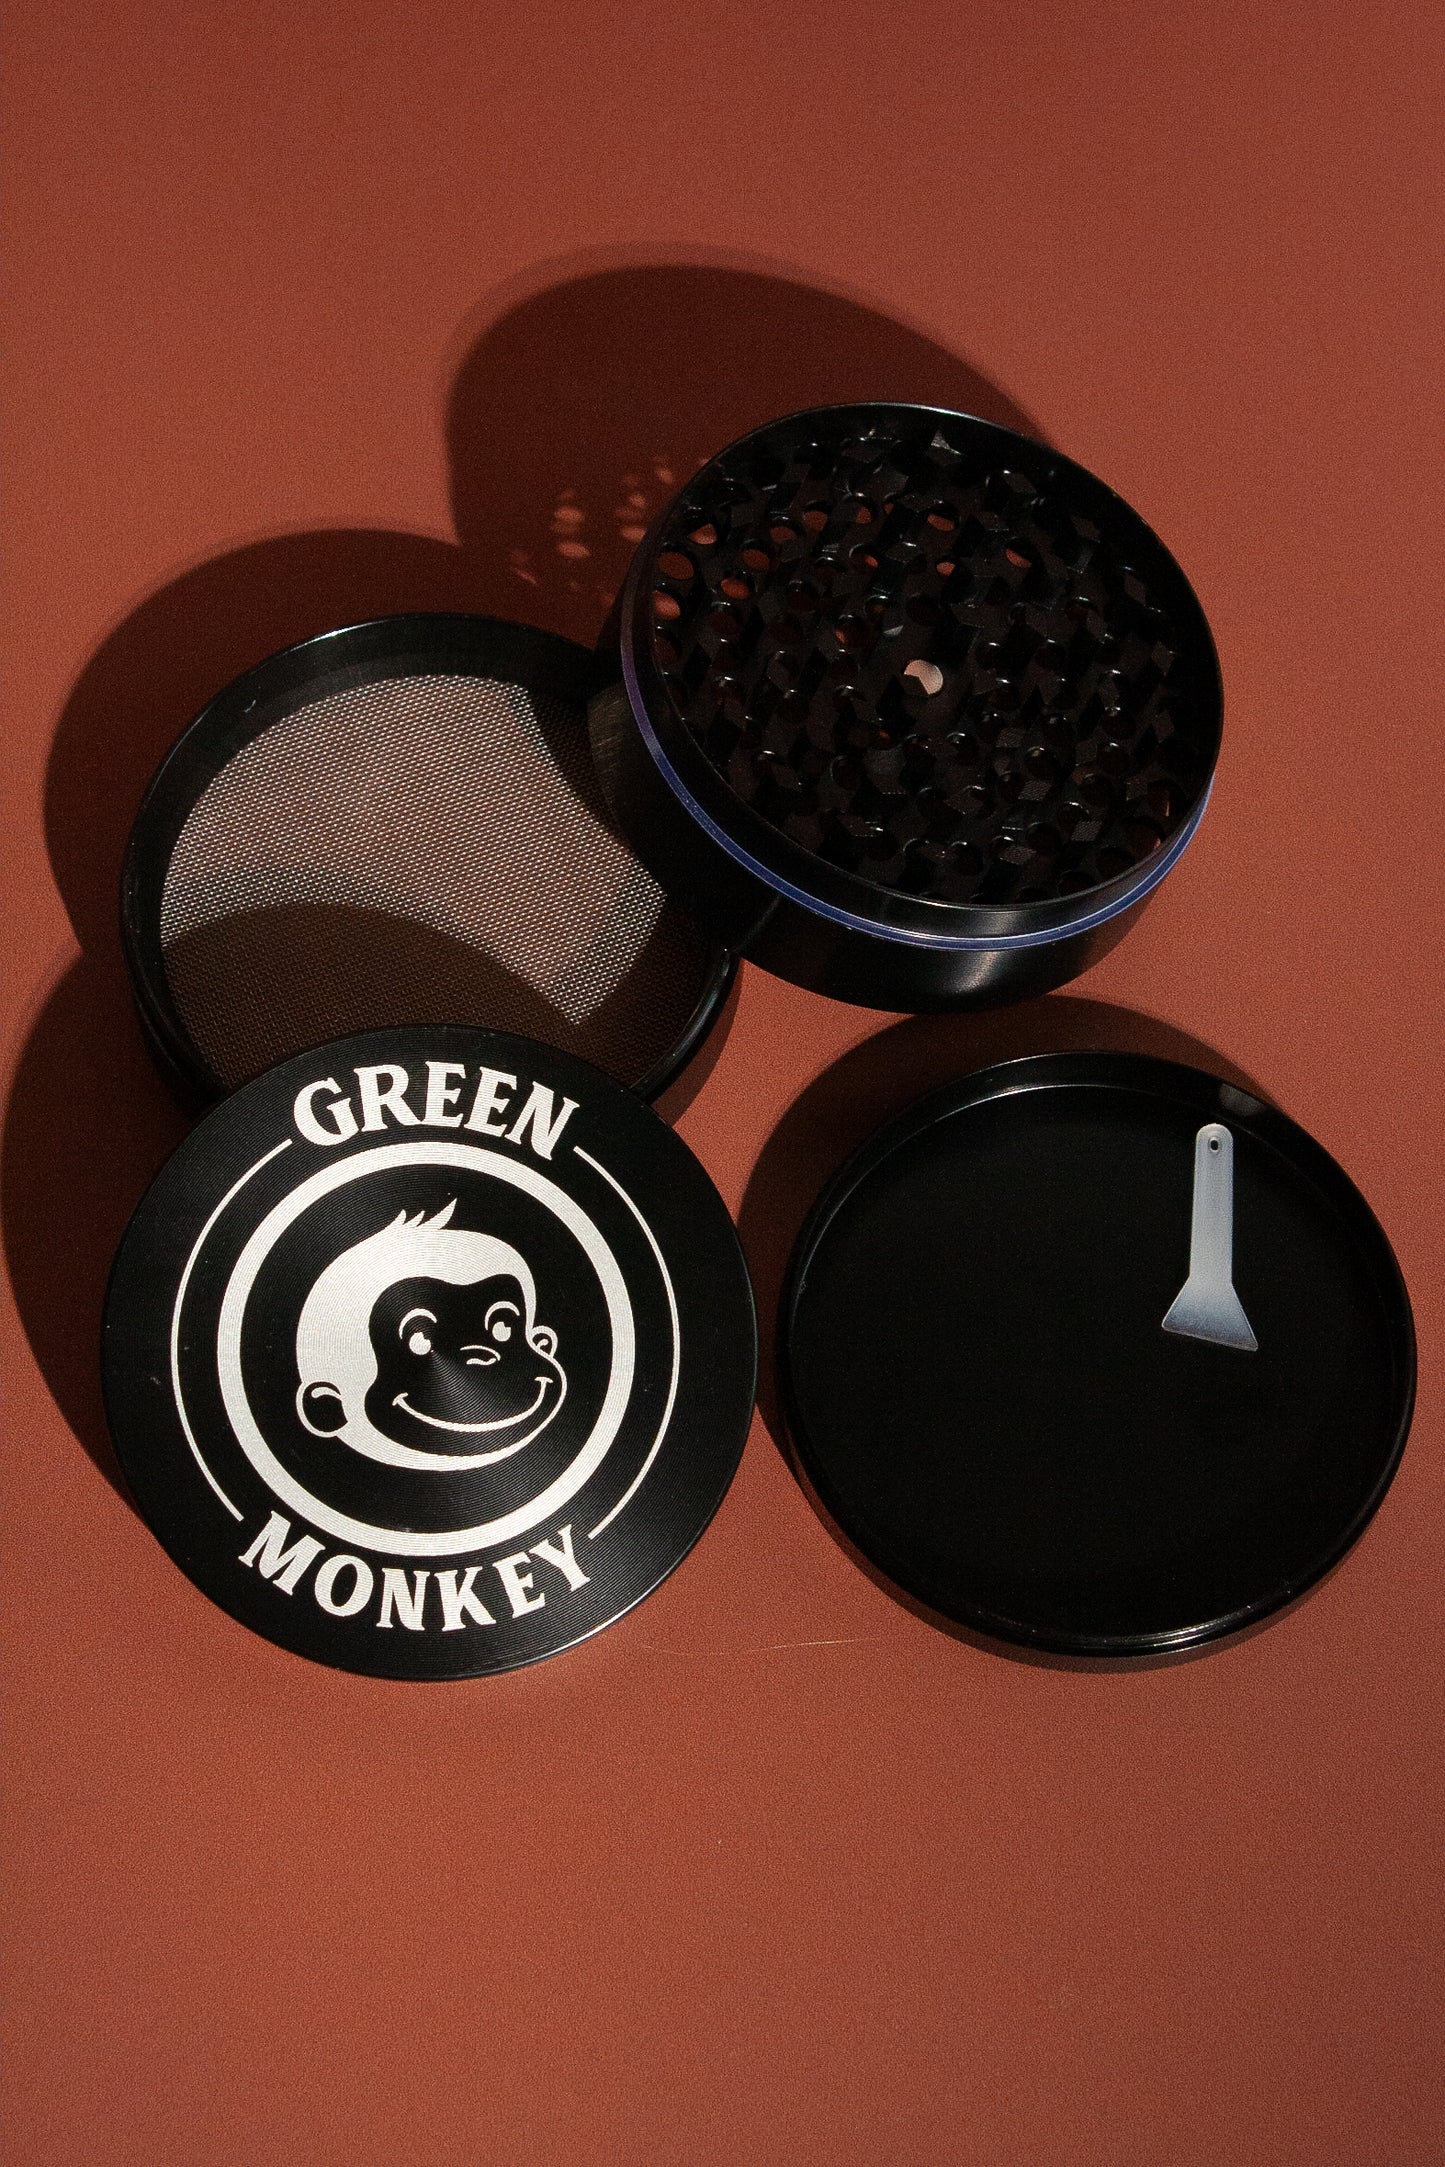 Green Monkey 3 inch Grinder (3 colour options)